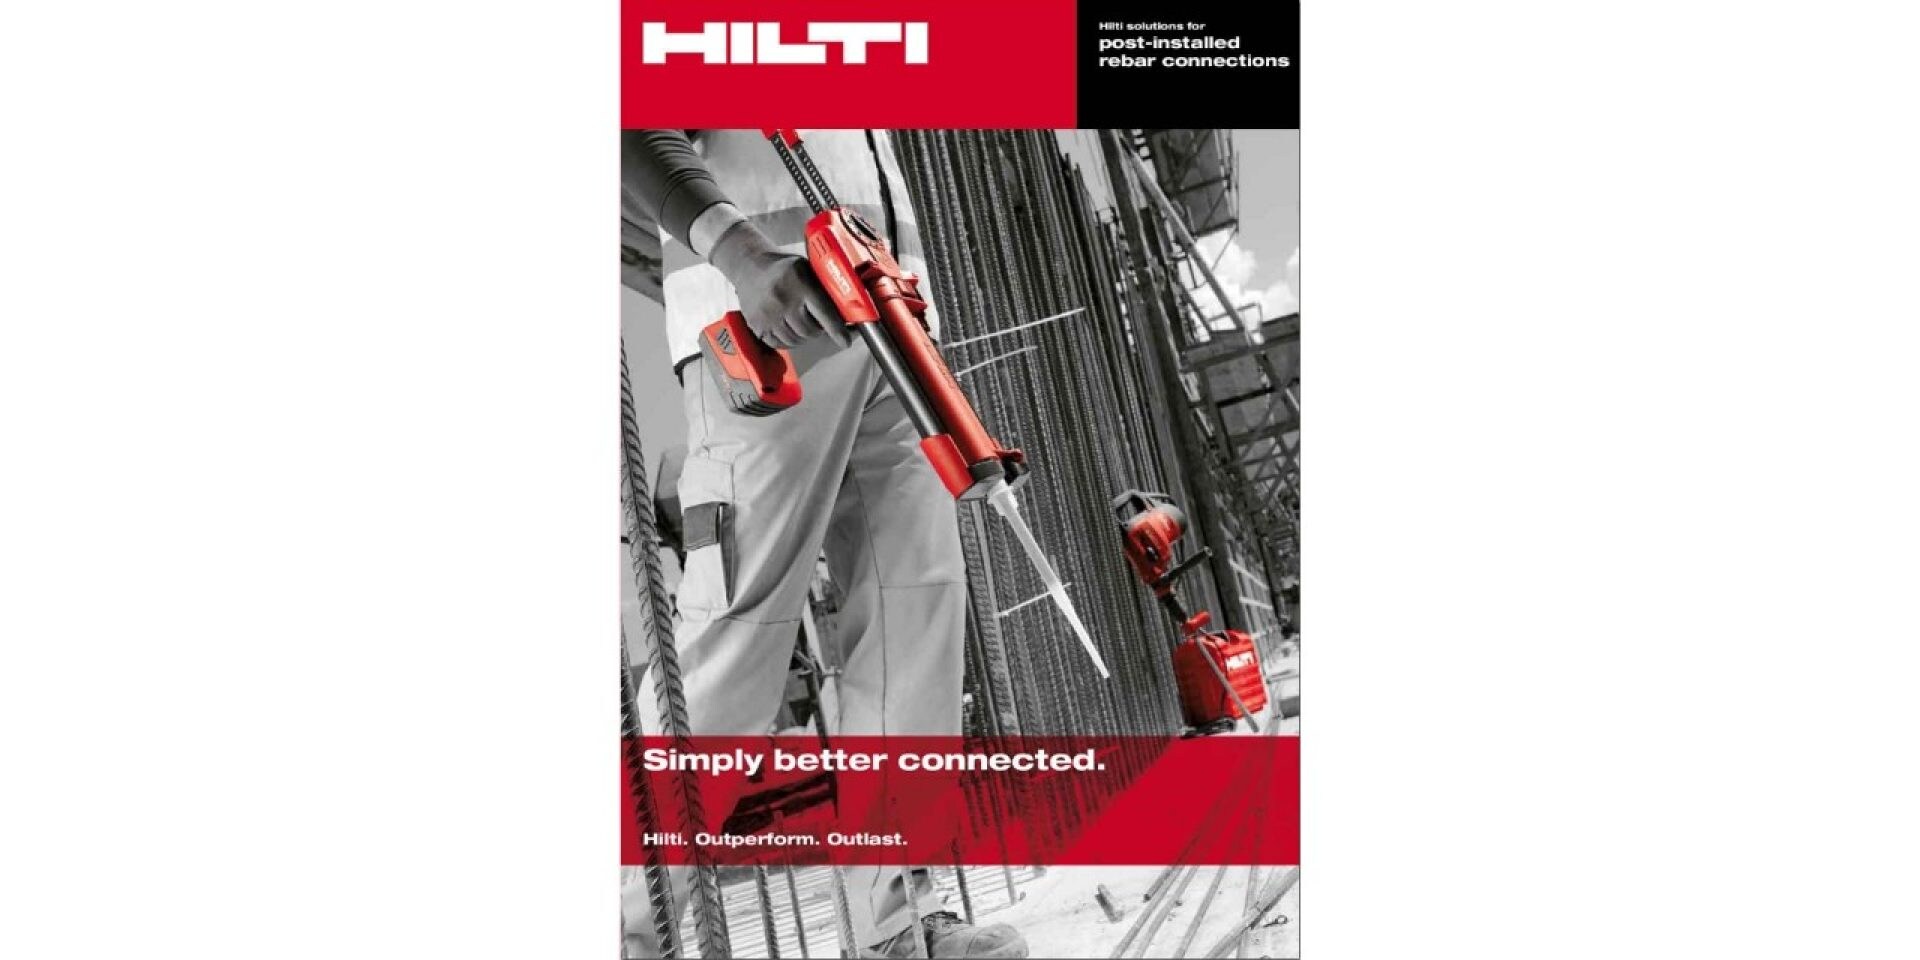 Hilti strengthening concrete overlay guide